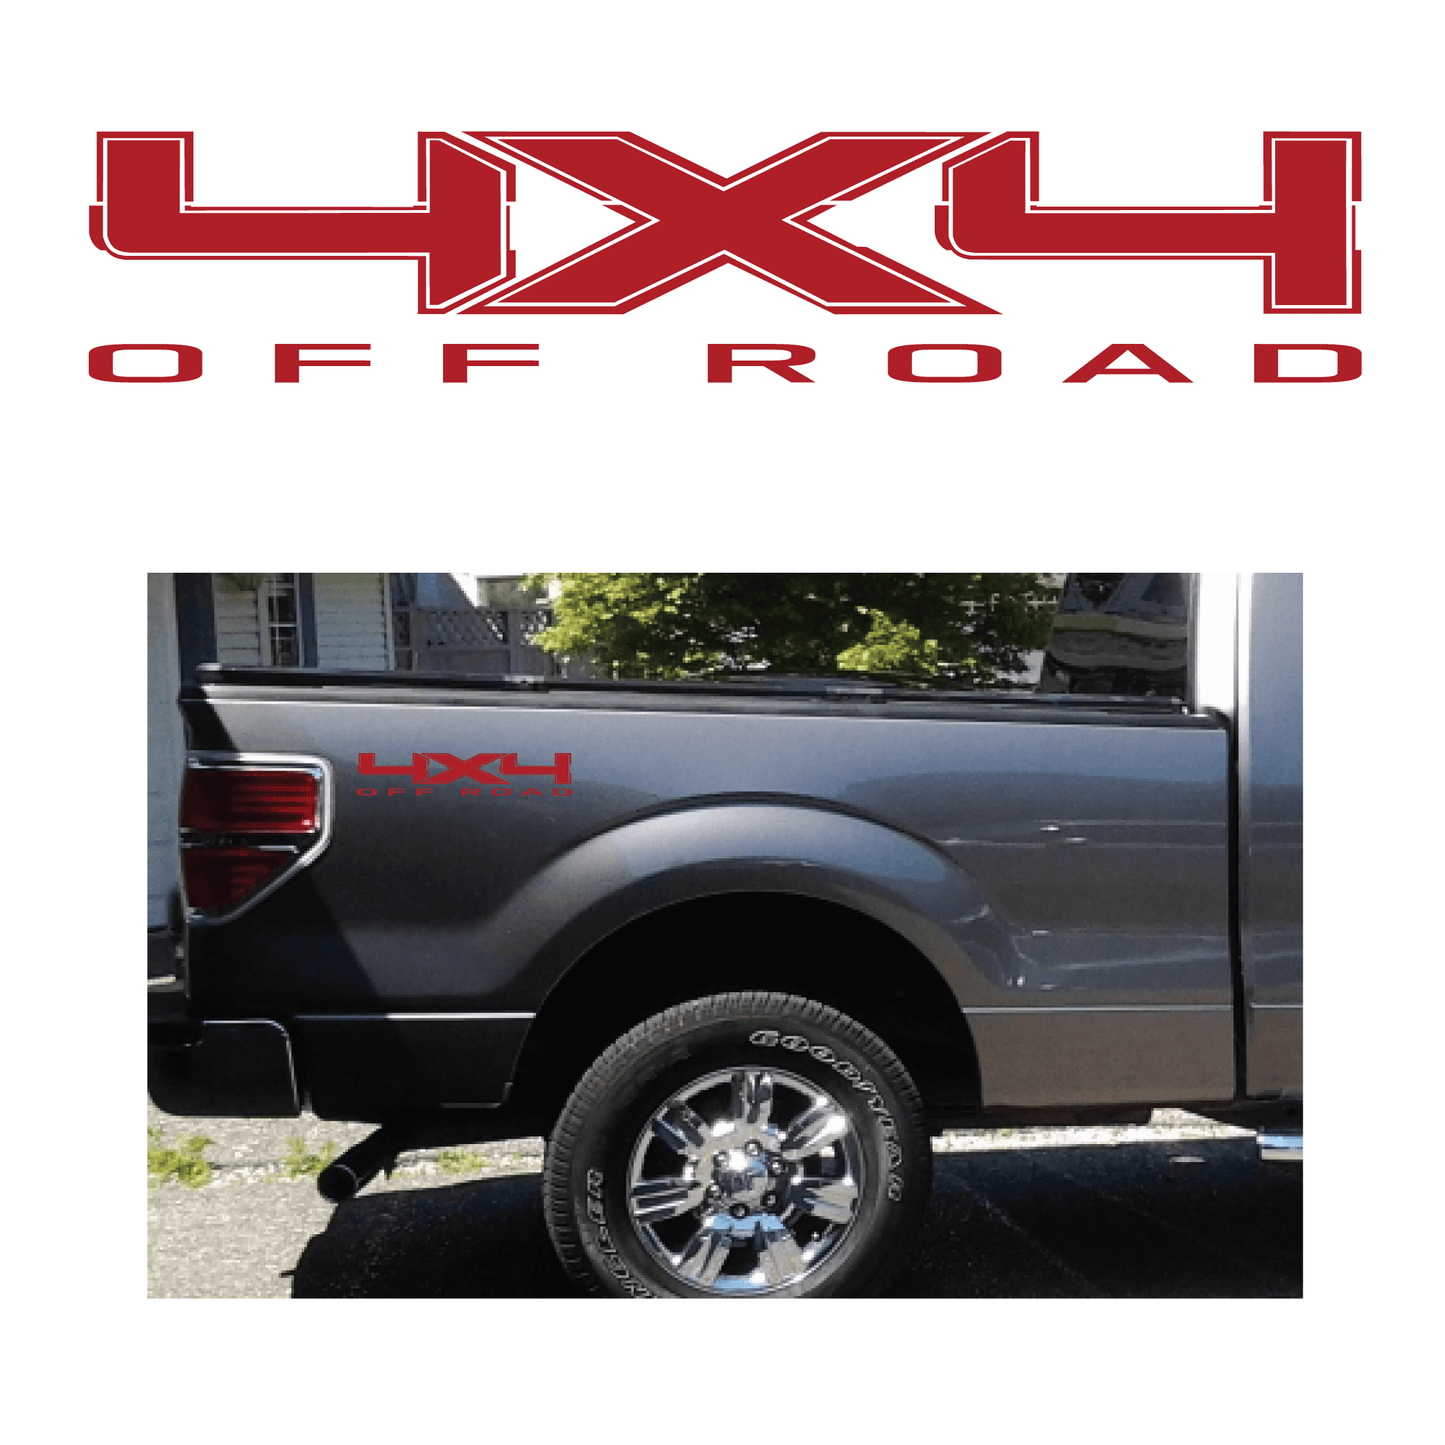 Shop Vinyl Design F-150 F-250 Trucks 4 x 4 Off Road Replacement Bedside Decals #10 Vehicle decal 001 Red Gloss Shop Vinyl Design decals stickers